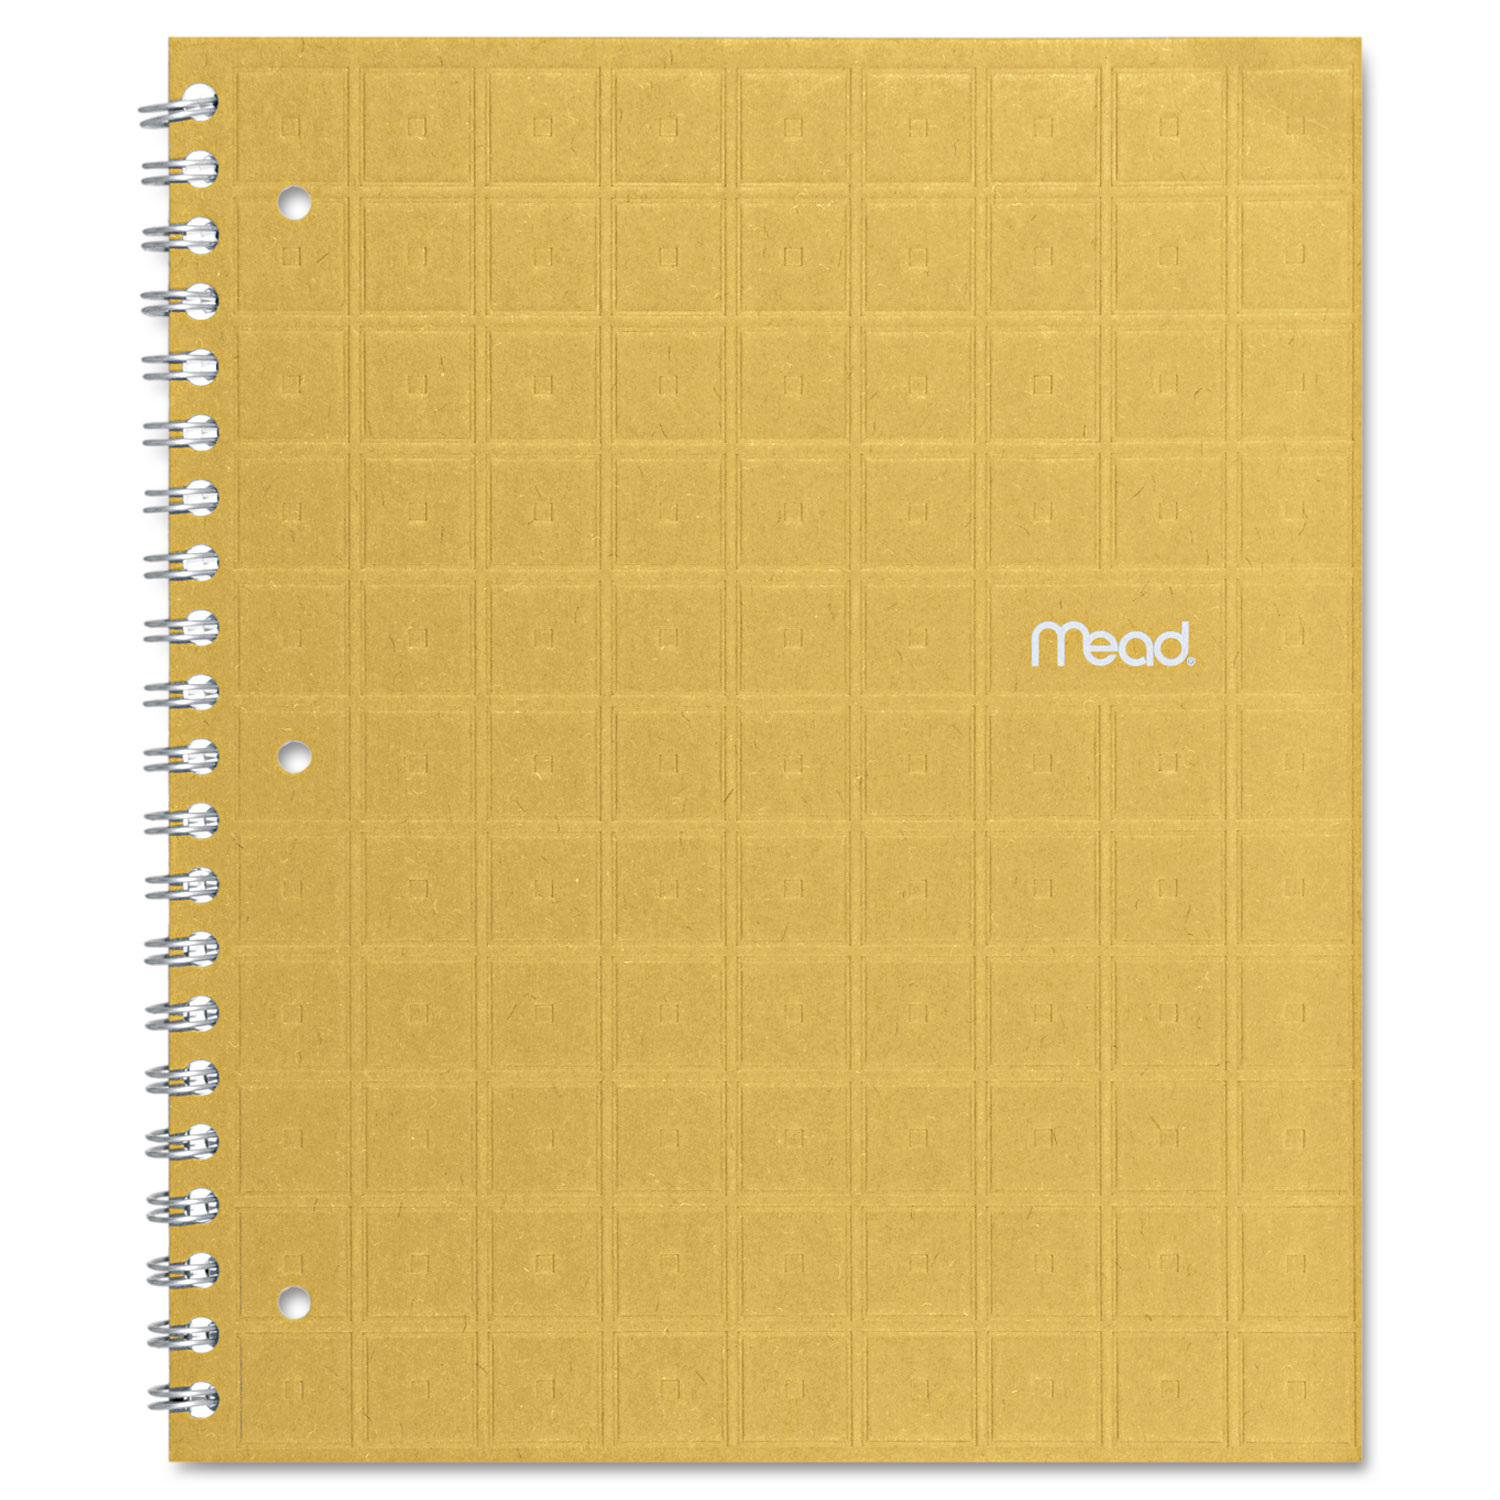  Mead 06594 Recycled Notebook, 1 Subject, Medium/College Rule, Assorted Color Covers, 11 x 8.5, 80 Sheets (MEA06594) 